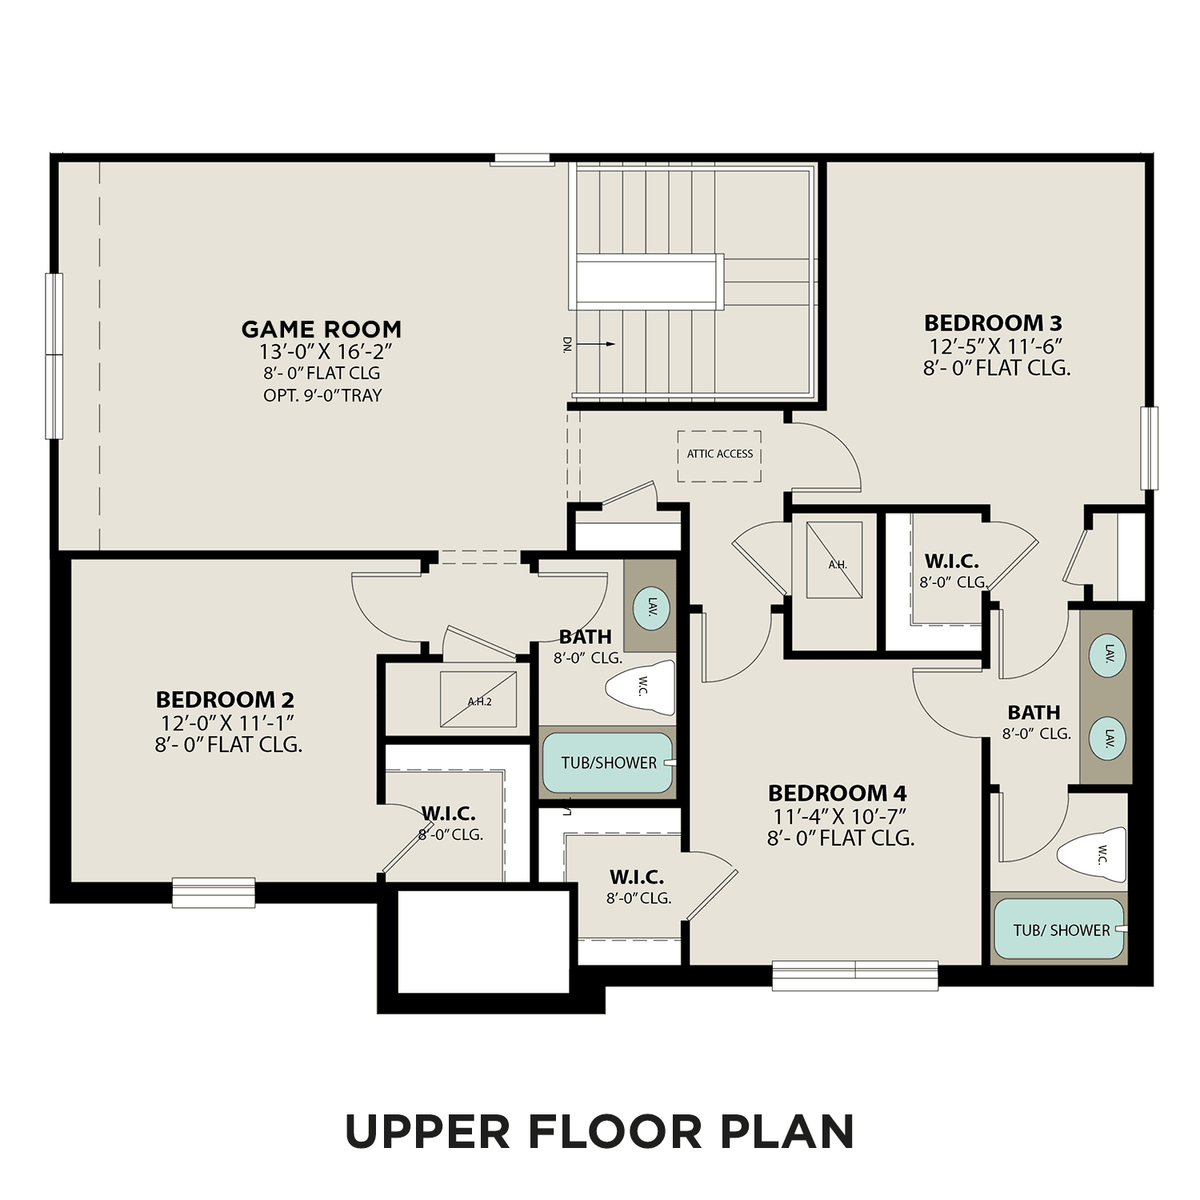 2 - The Sequoia A with 3-Car Garage buildable floor plan layout in Davidson Homes' Sierra Vista community.